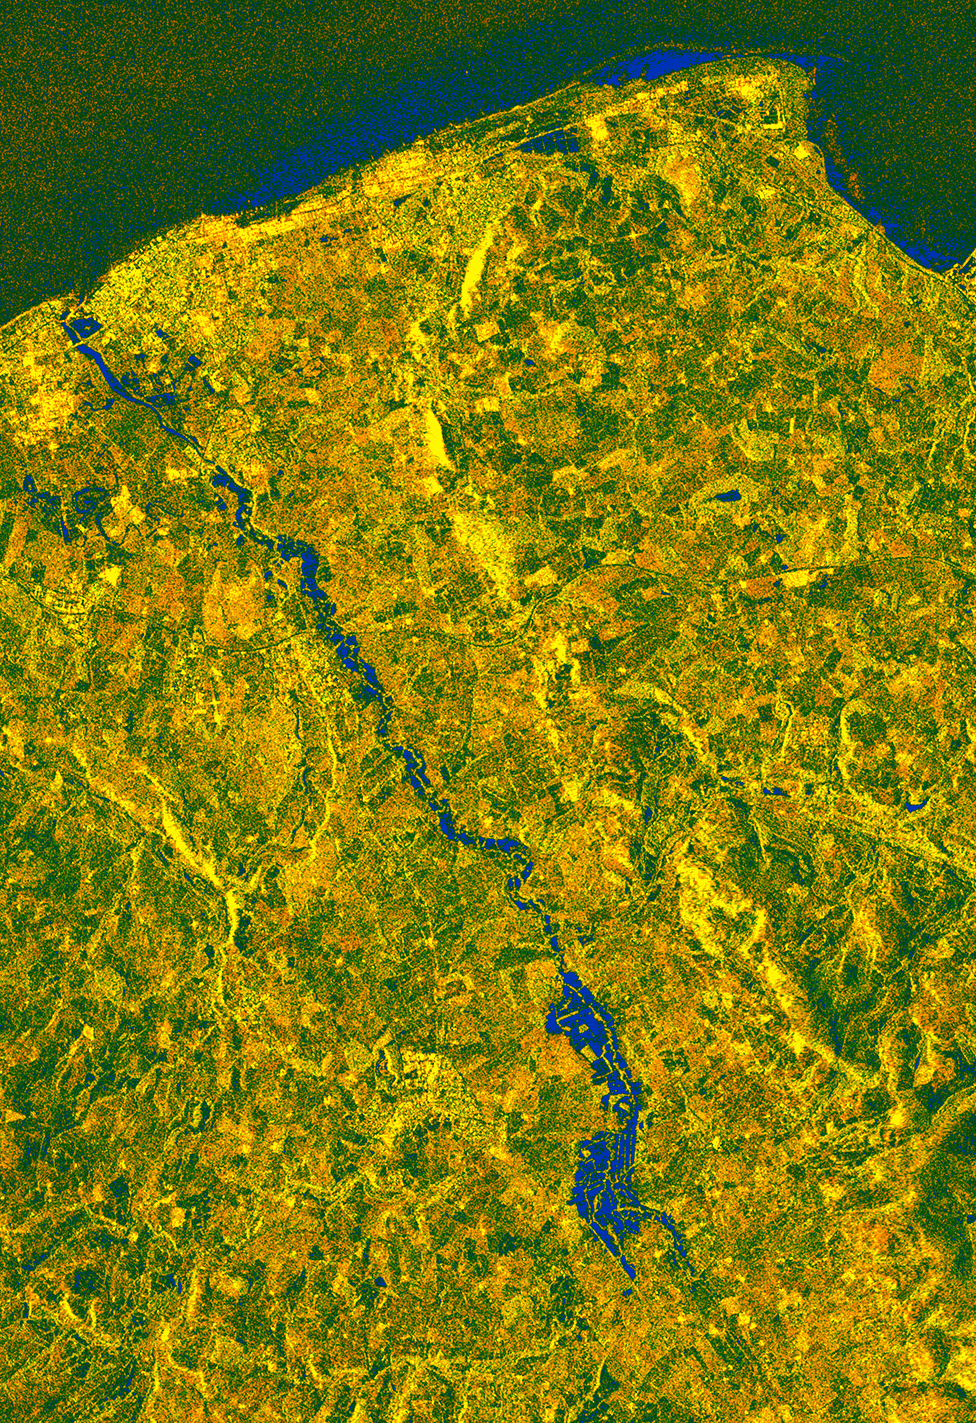 Flood waters (dark blue) from the River Clwyd in North Wales are imaged by the EU's Sentinel-1 radar satellite on Thursday